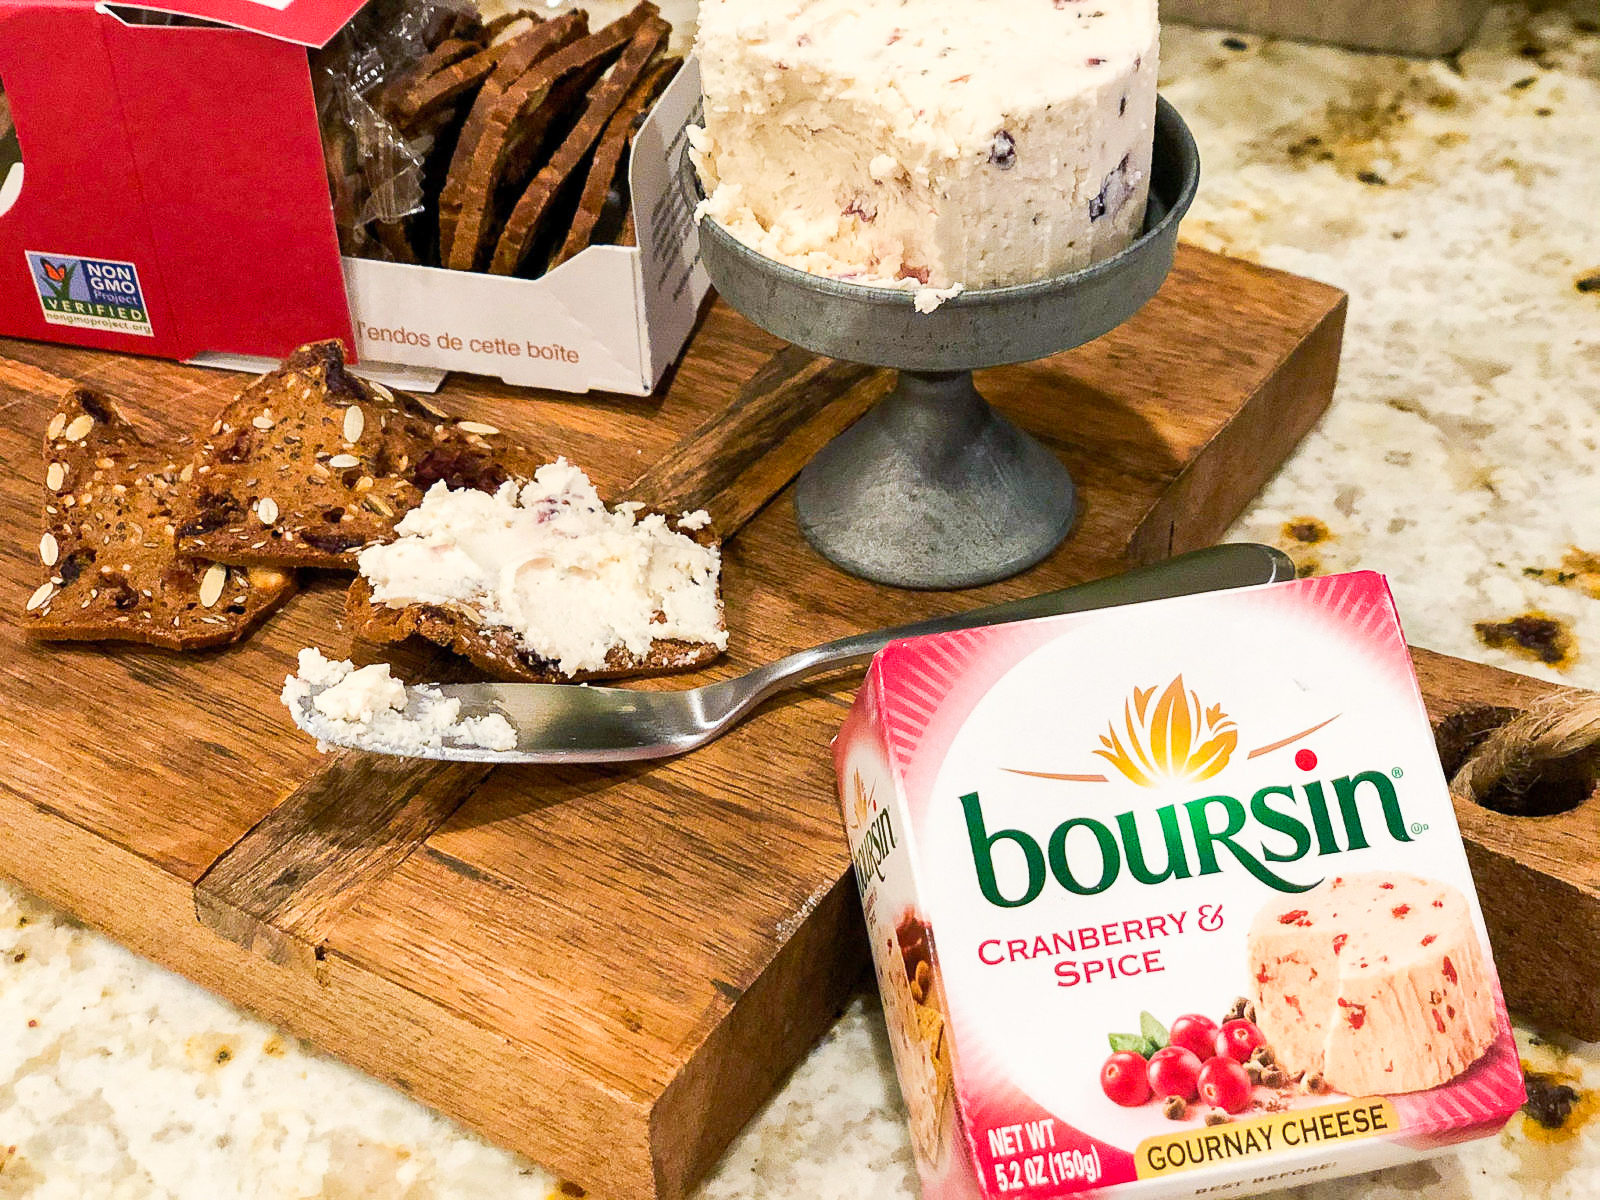 Boursin Gournay Cheese Just $4 At Publix (Regular Price $5.99) on I Heart Publix